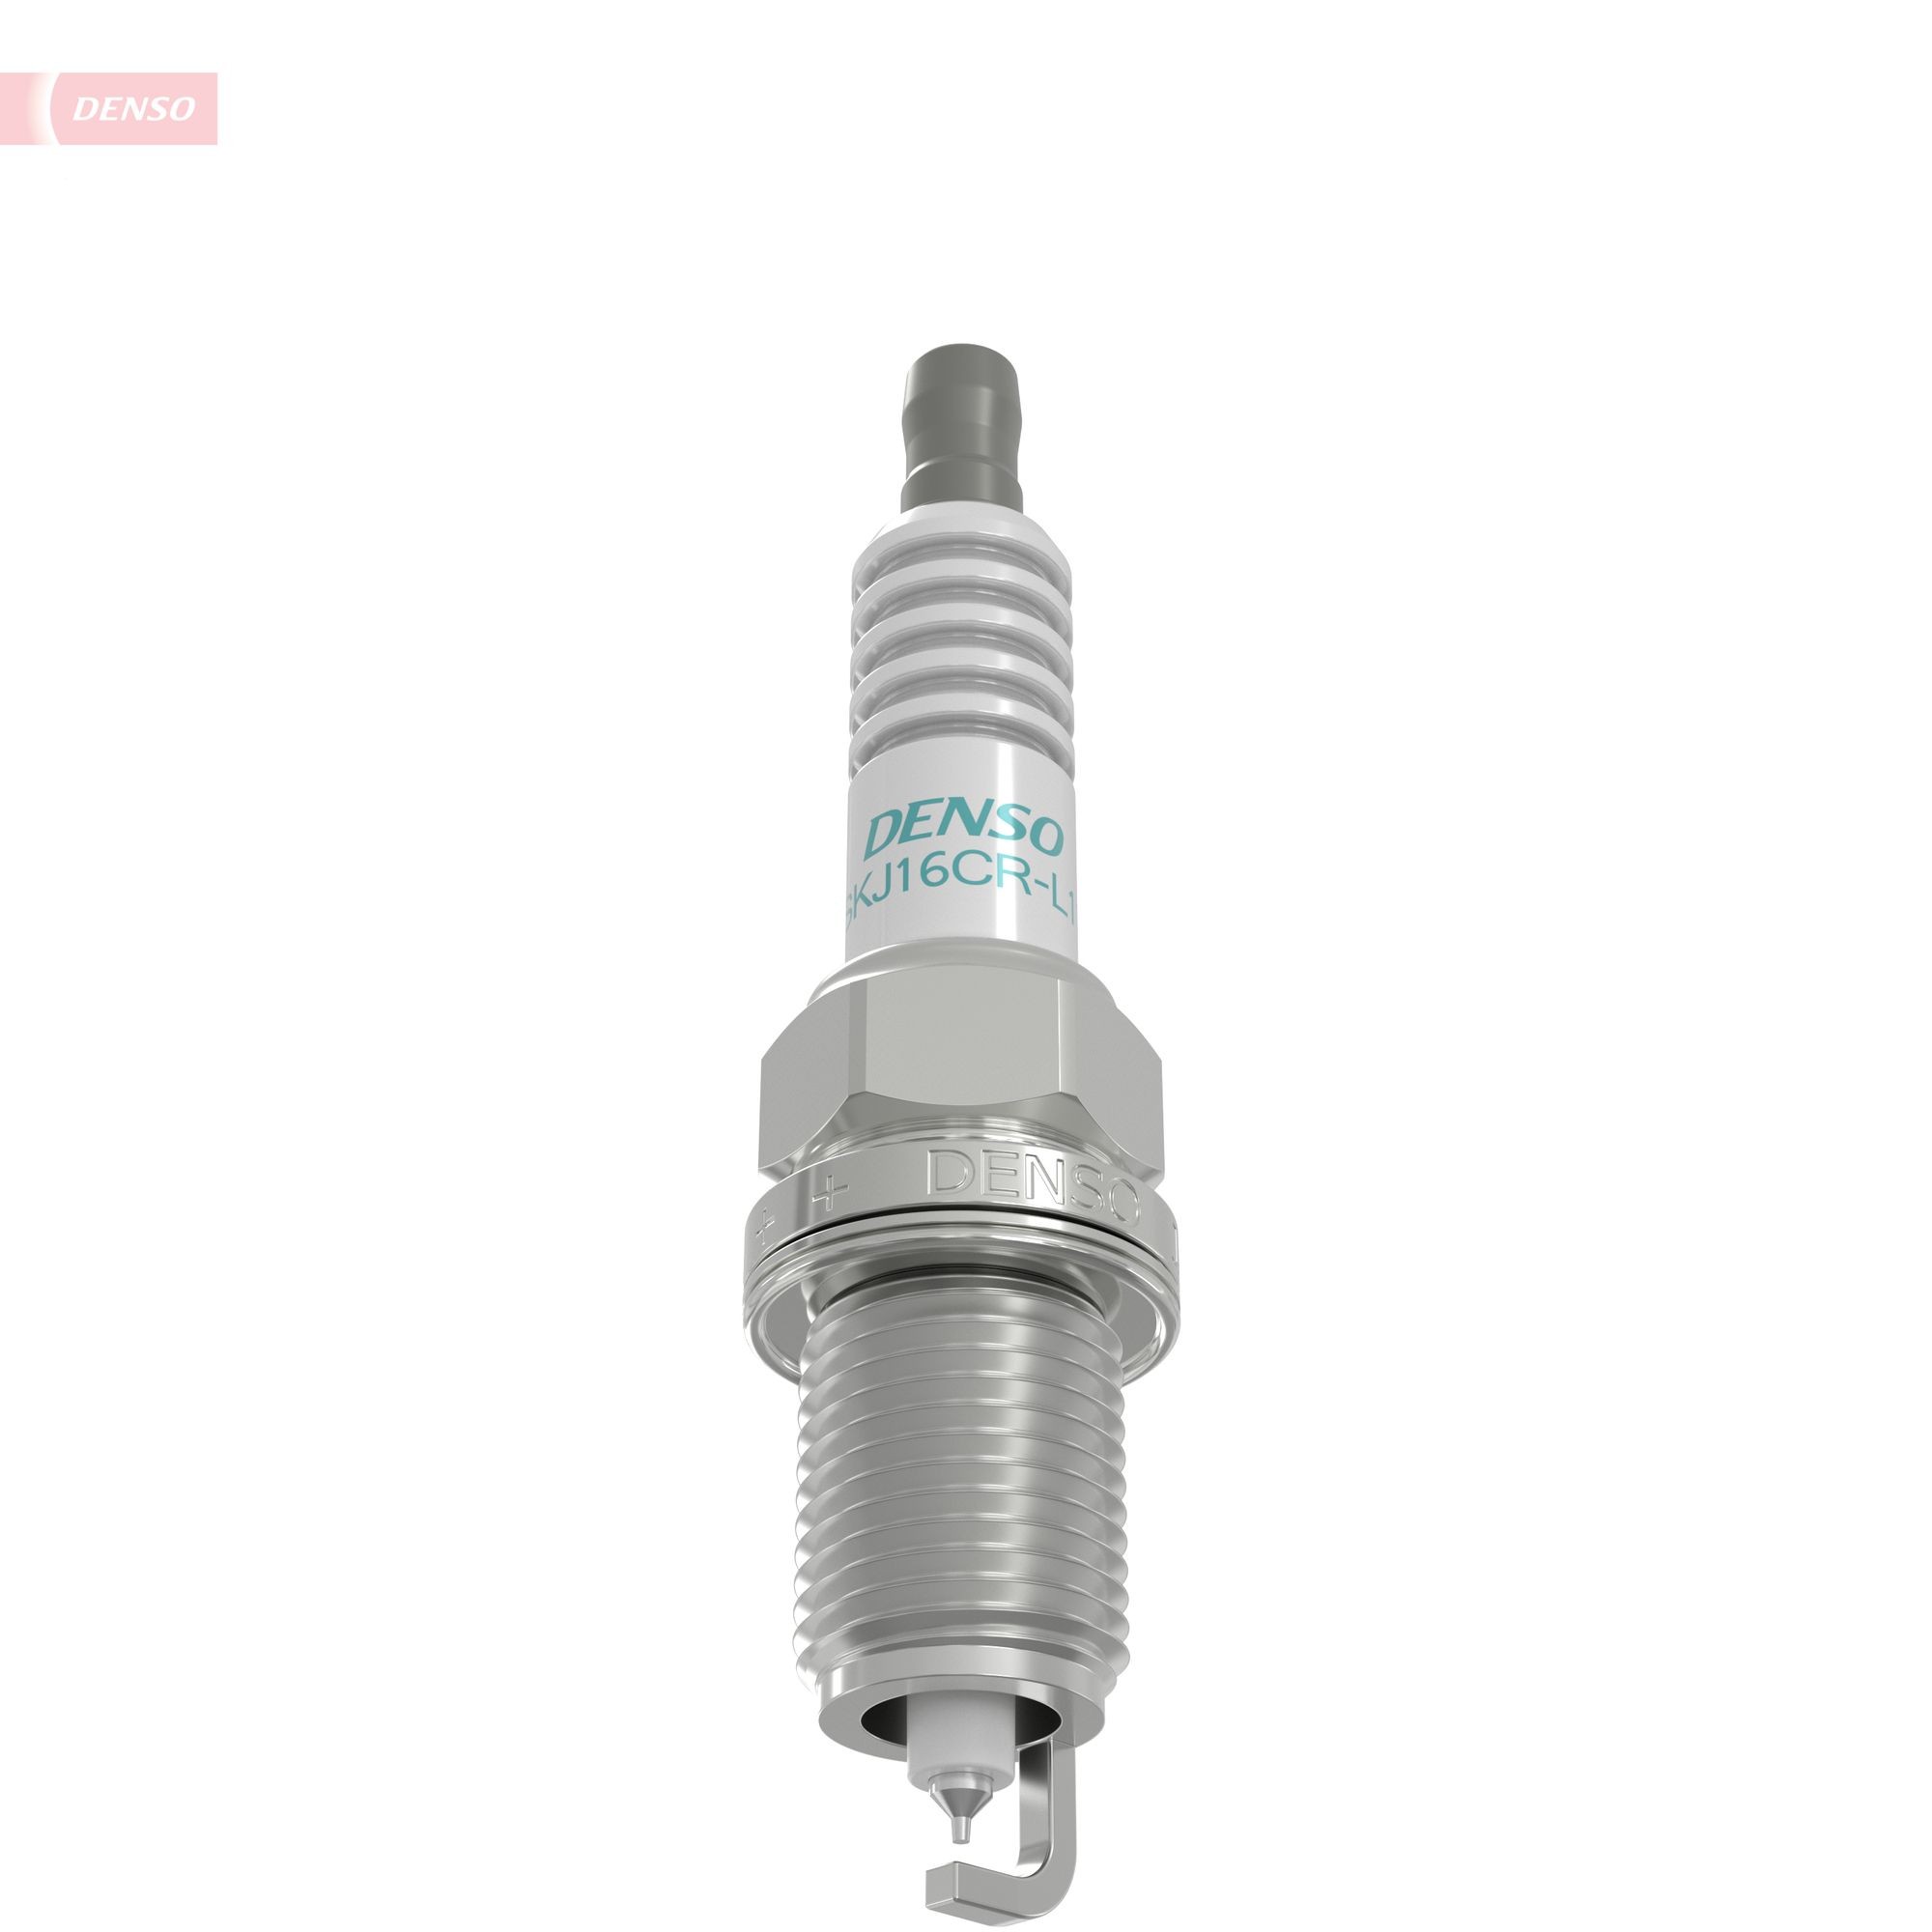 DENSO Spark plugs 3396 buy online